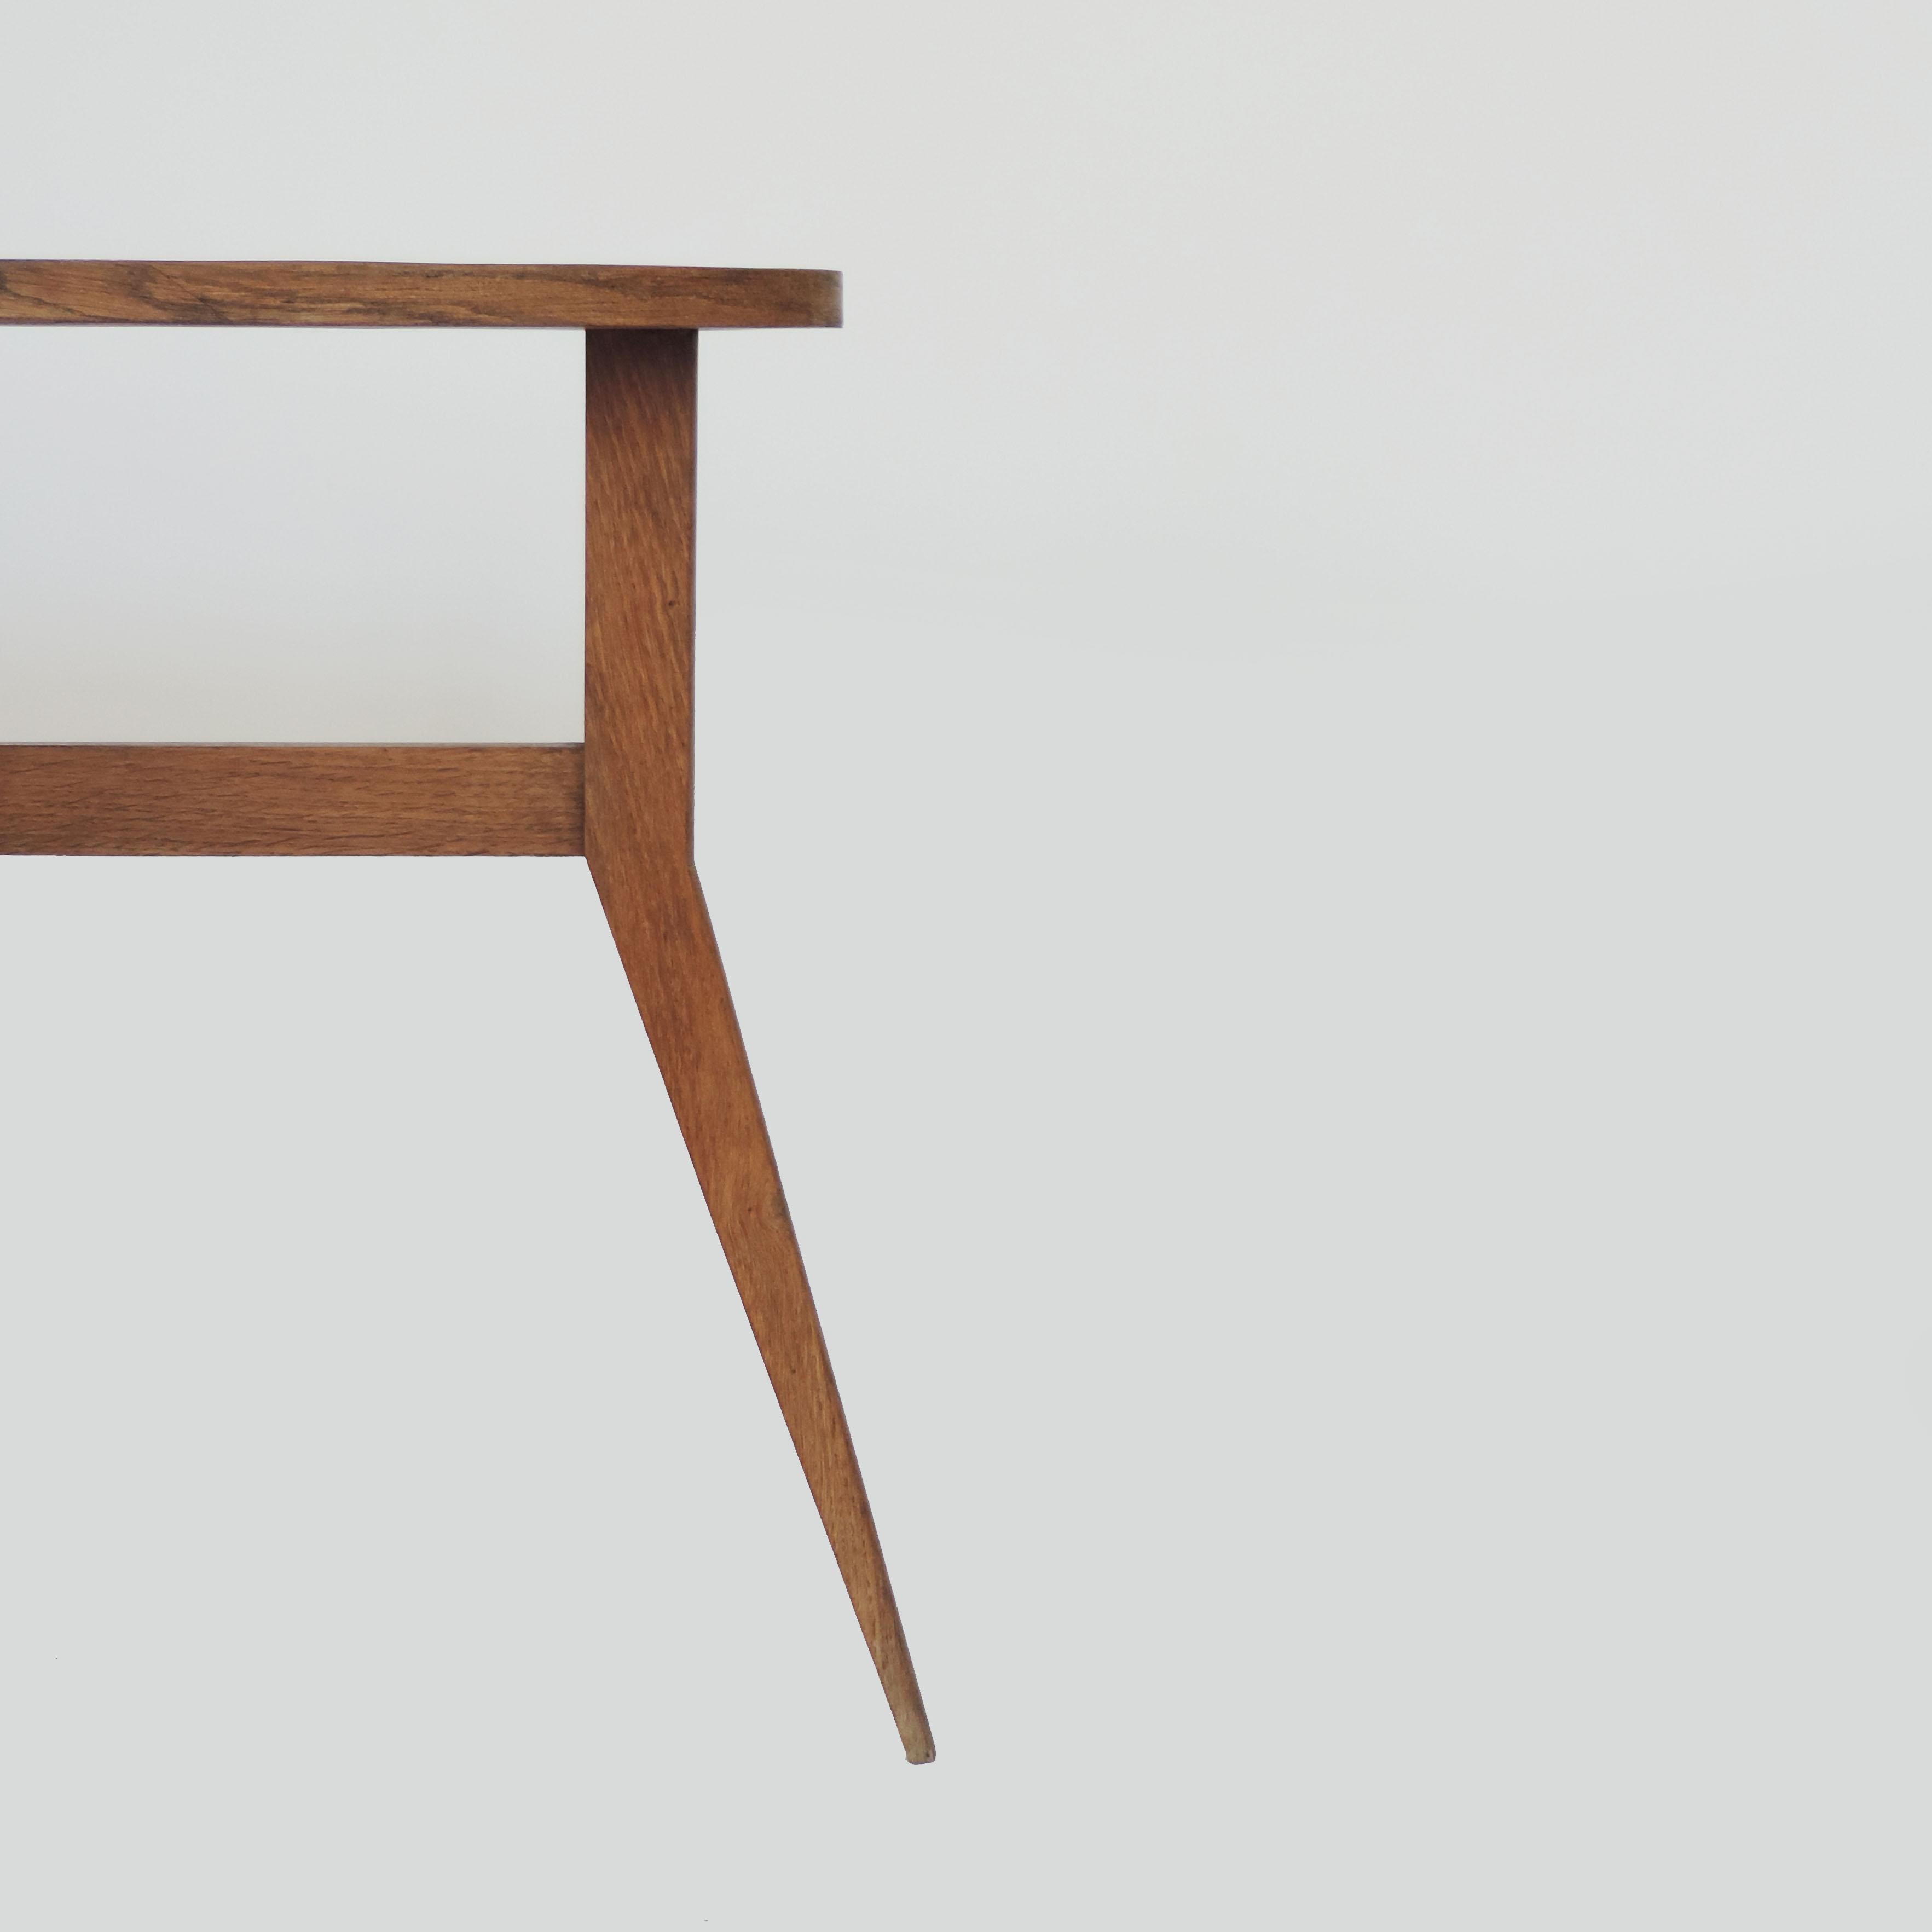 Italian Midcentury Side Table Attributed to Gio Ponti 1